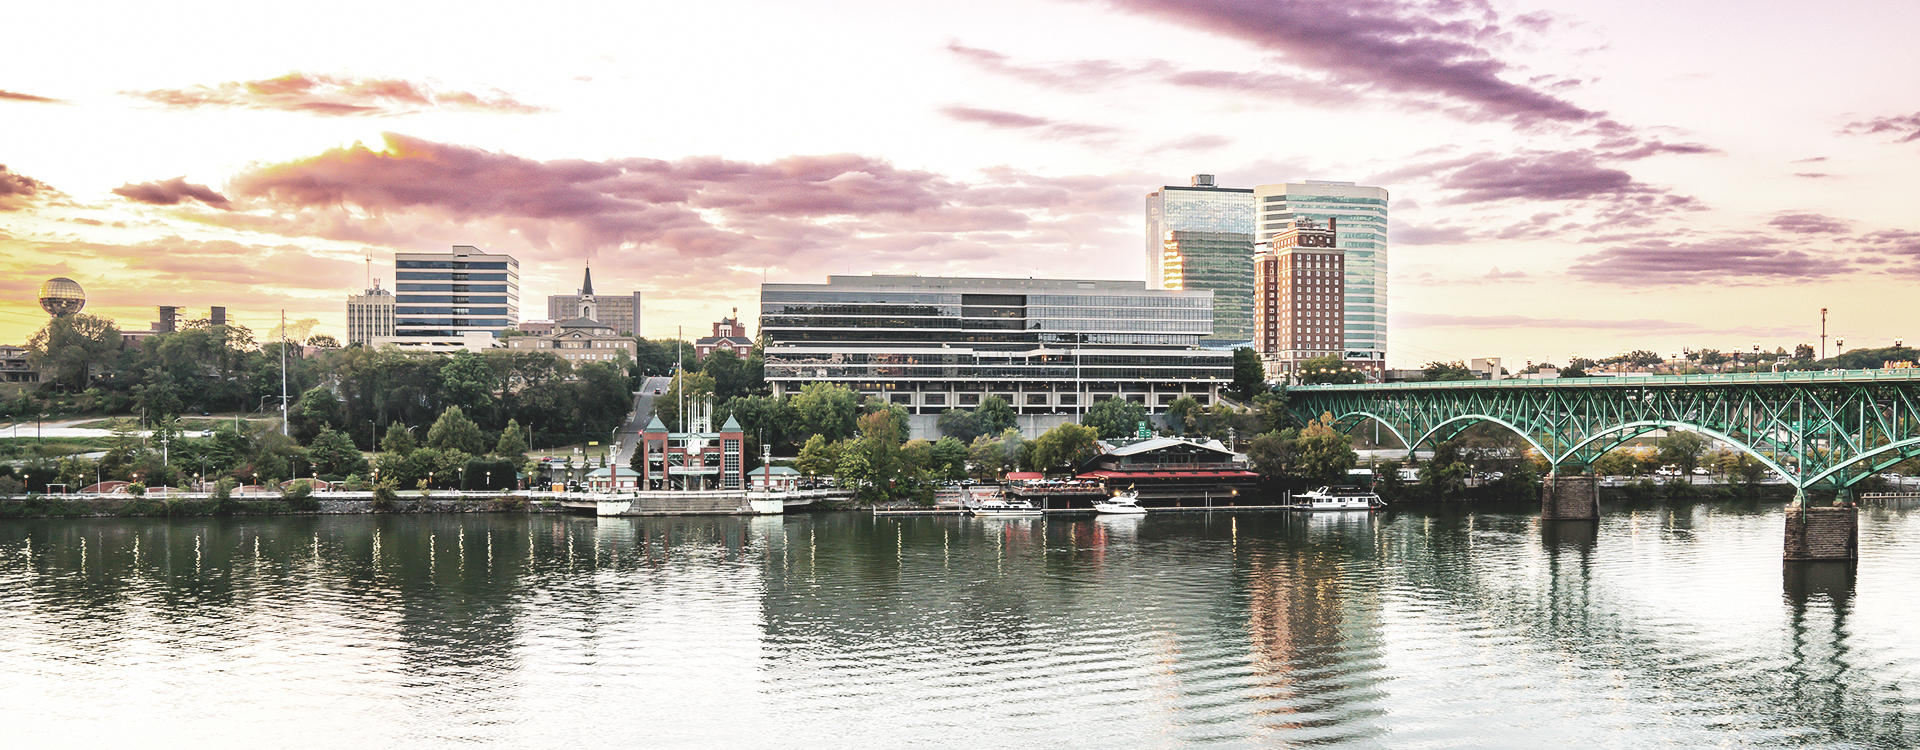 Knoxville, Tennessee City Skyline at sunset